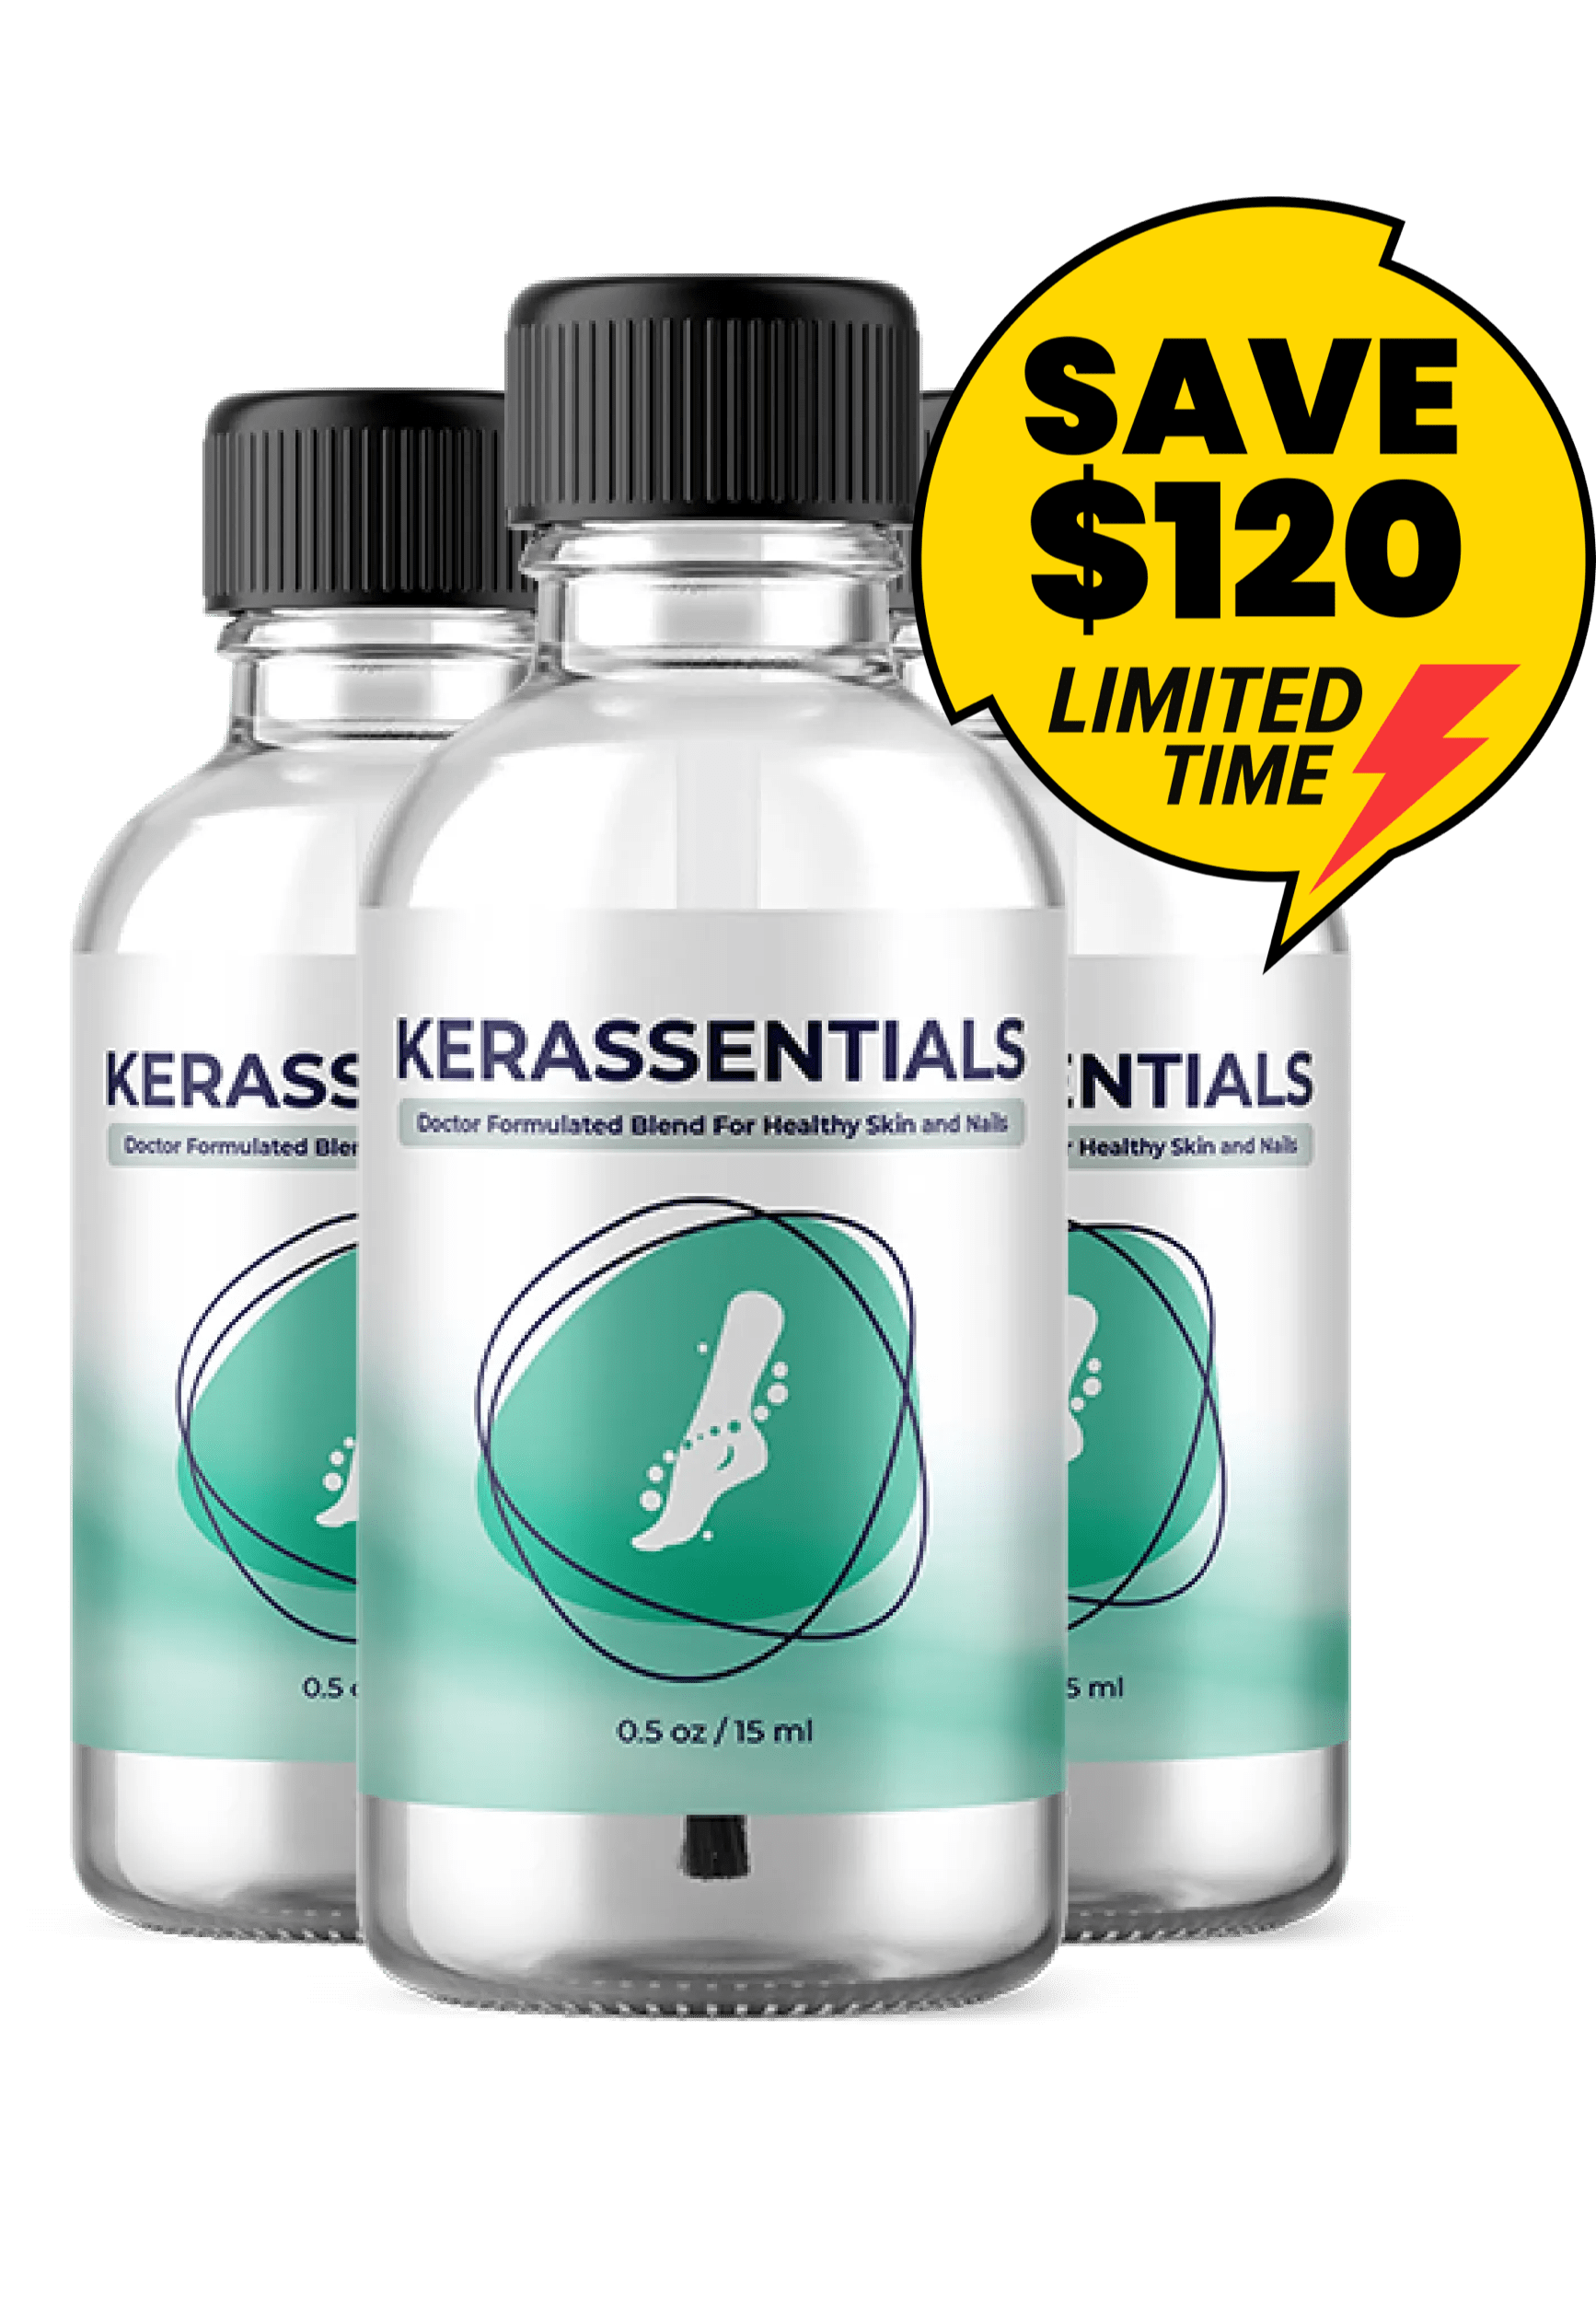 Kerassentials oils - Support Healthy Nails And Skin